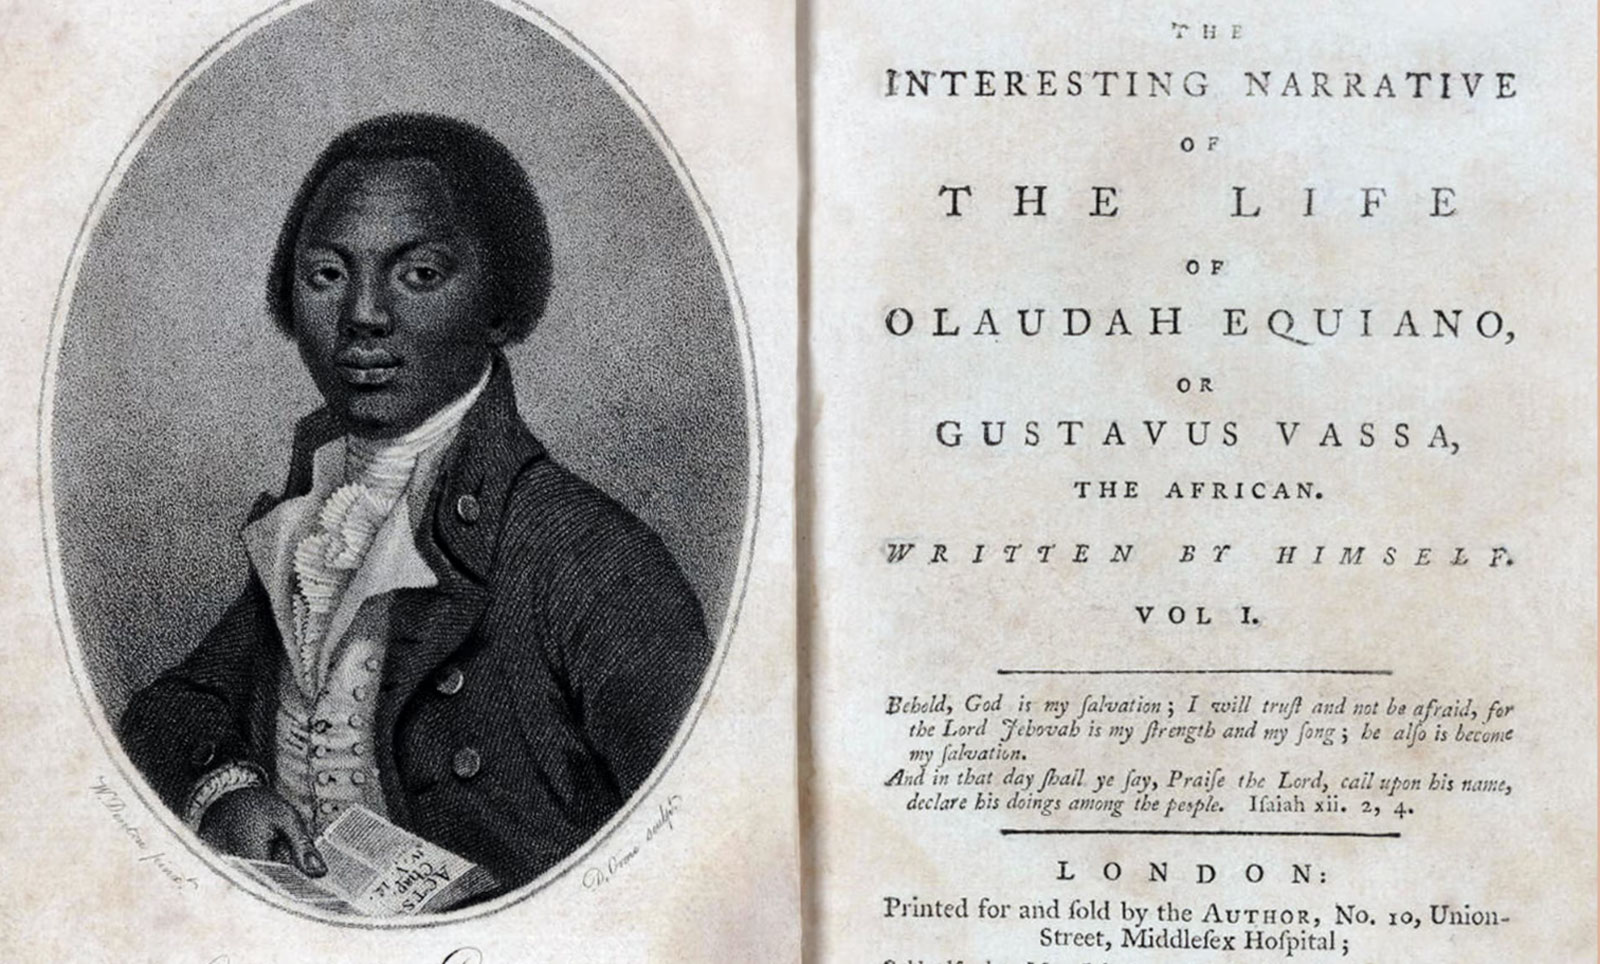 The autobiography of Olaudah Equiano. Photograph: Universal History Archive/UIG/Getty Images